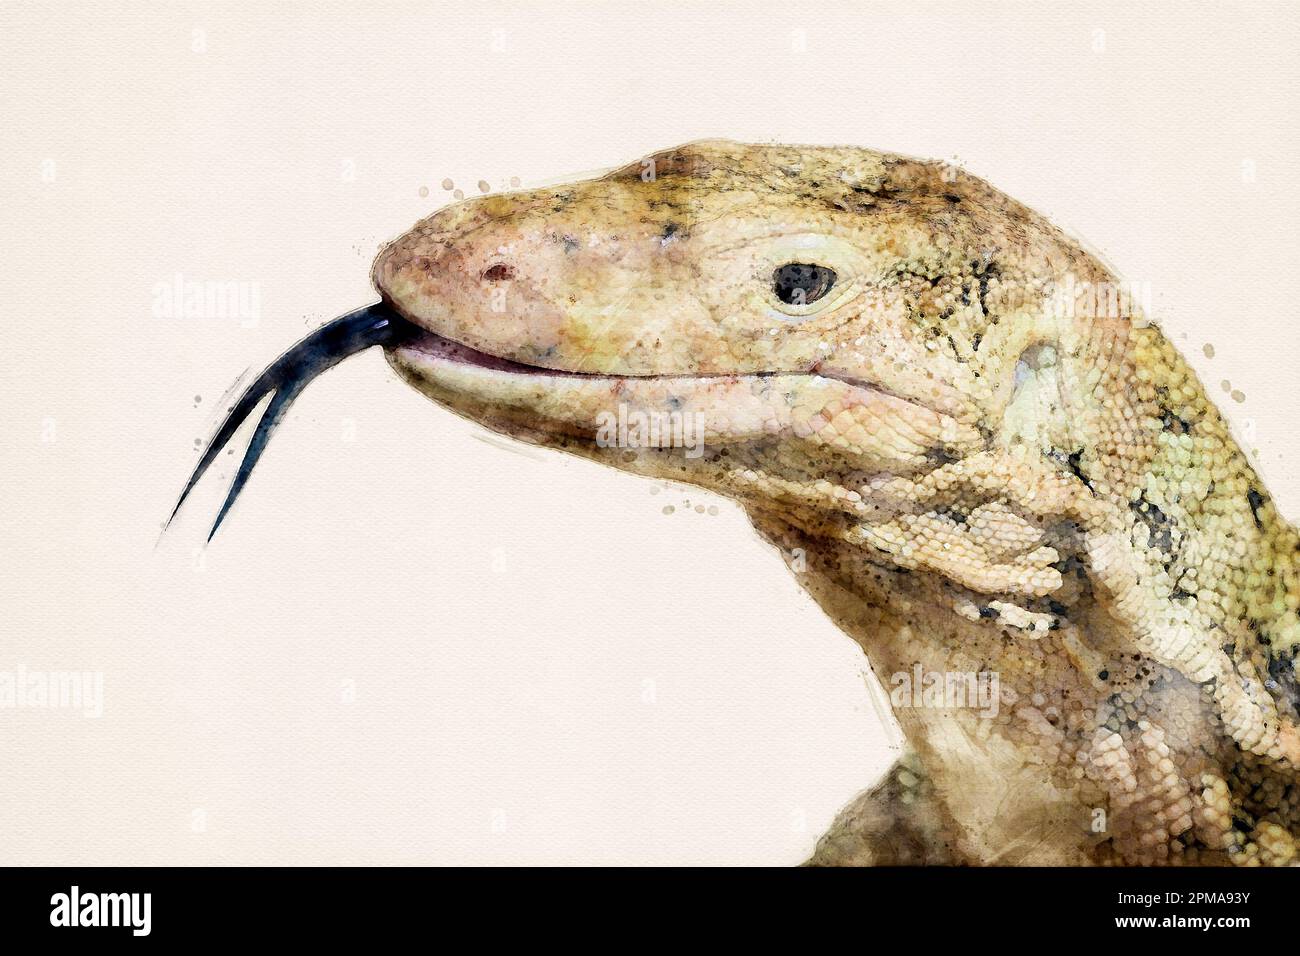 Monitor lizard. Close up portrait of large Asian water monitor native to South and Southeast Asia. Head showing split tongue. Watercolor illustration. Stock Photo